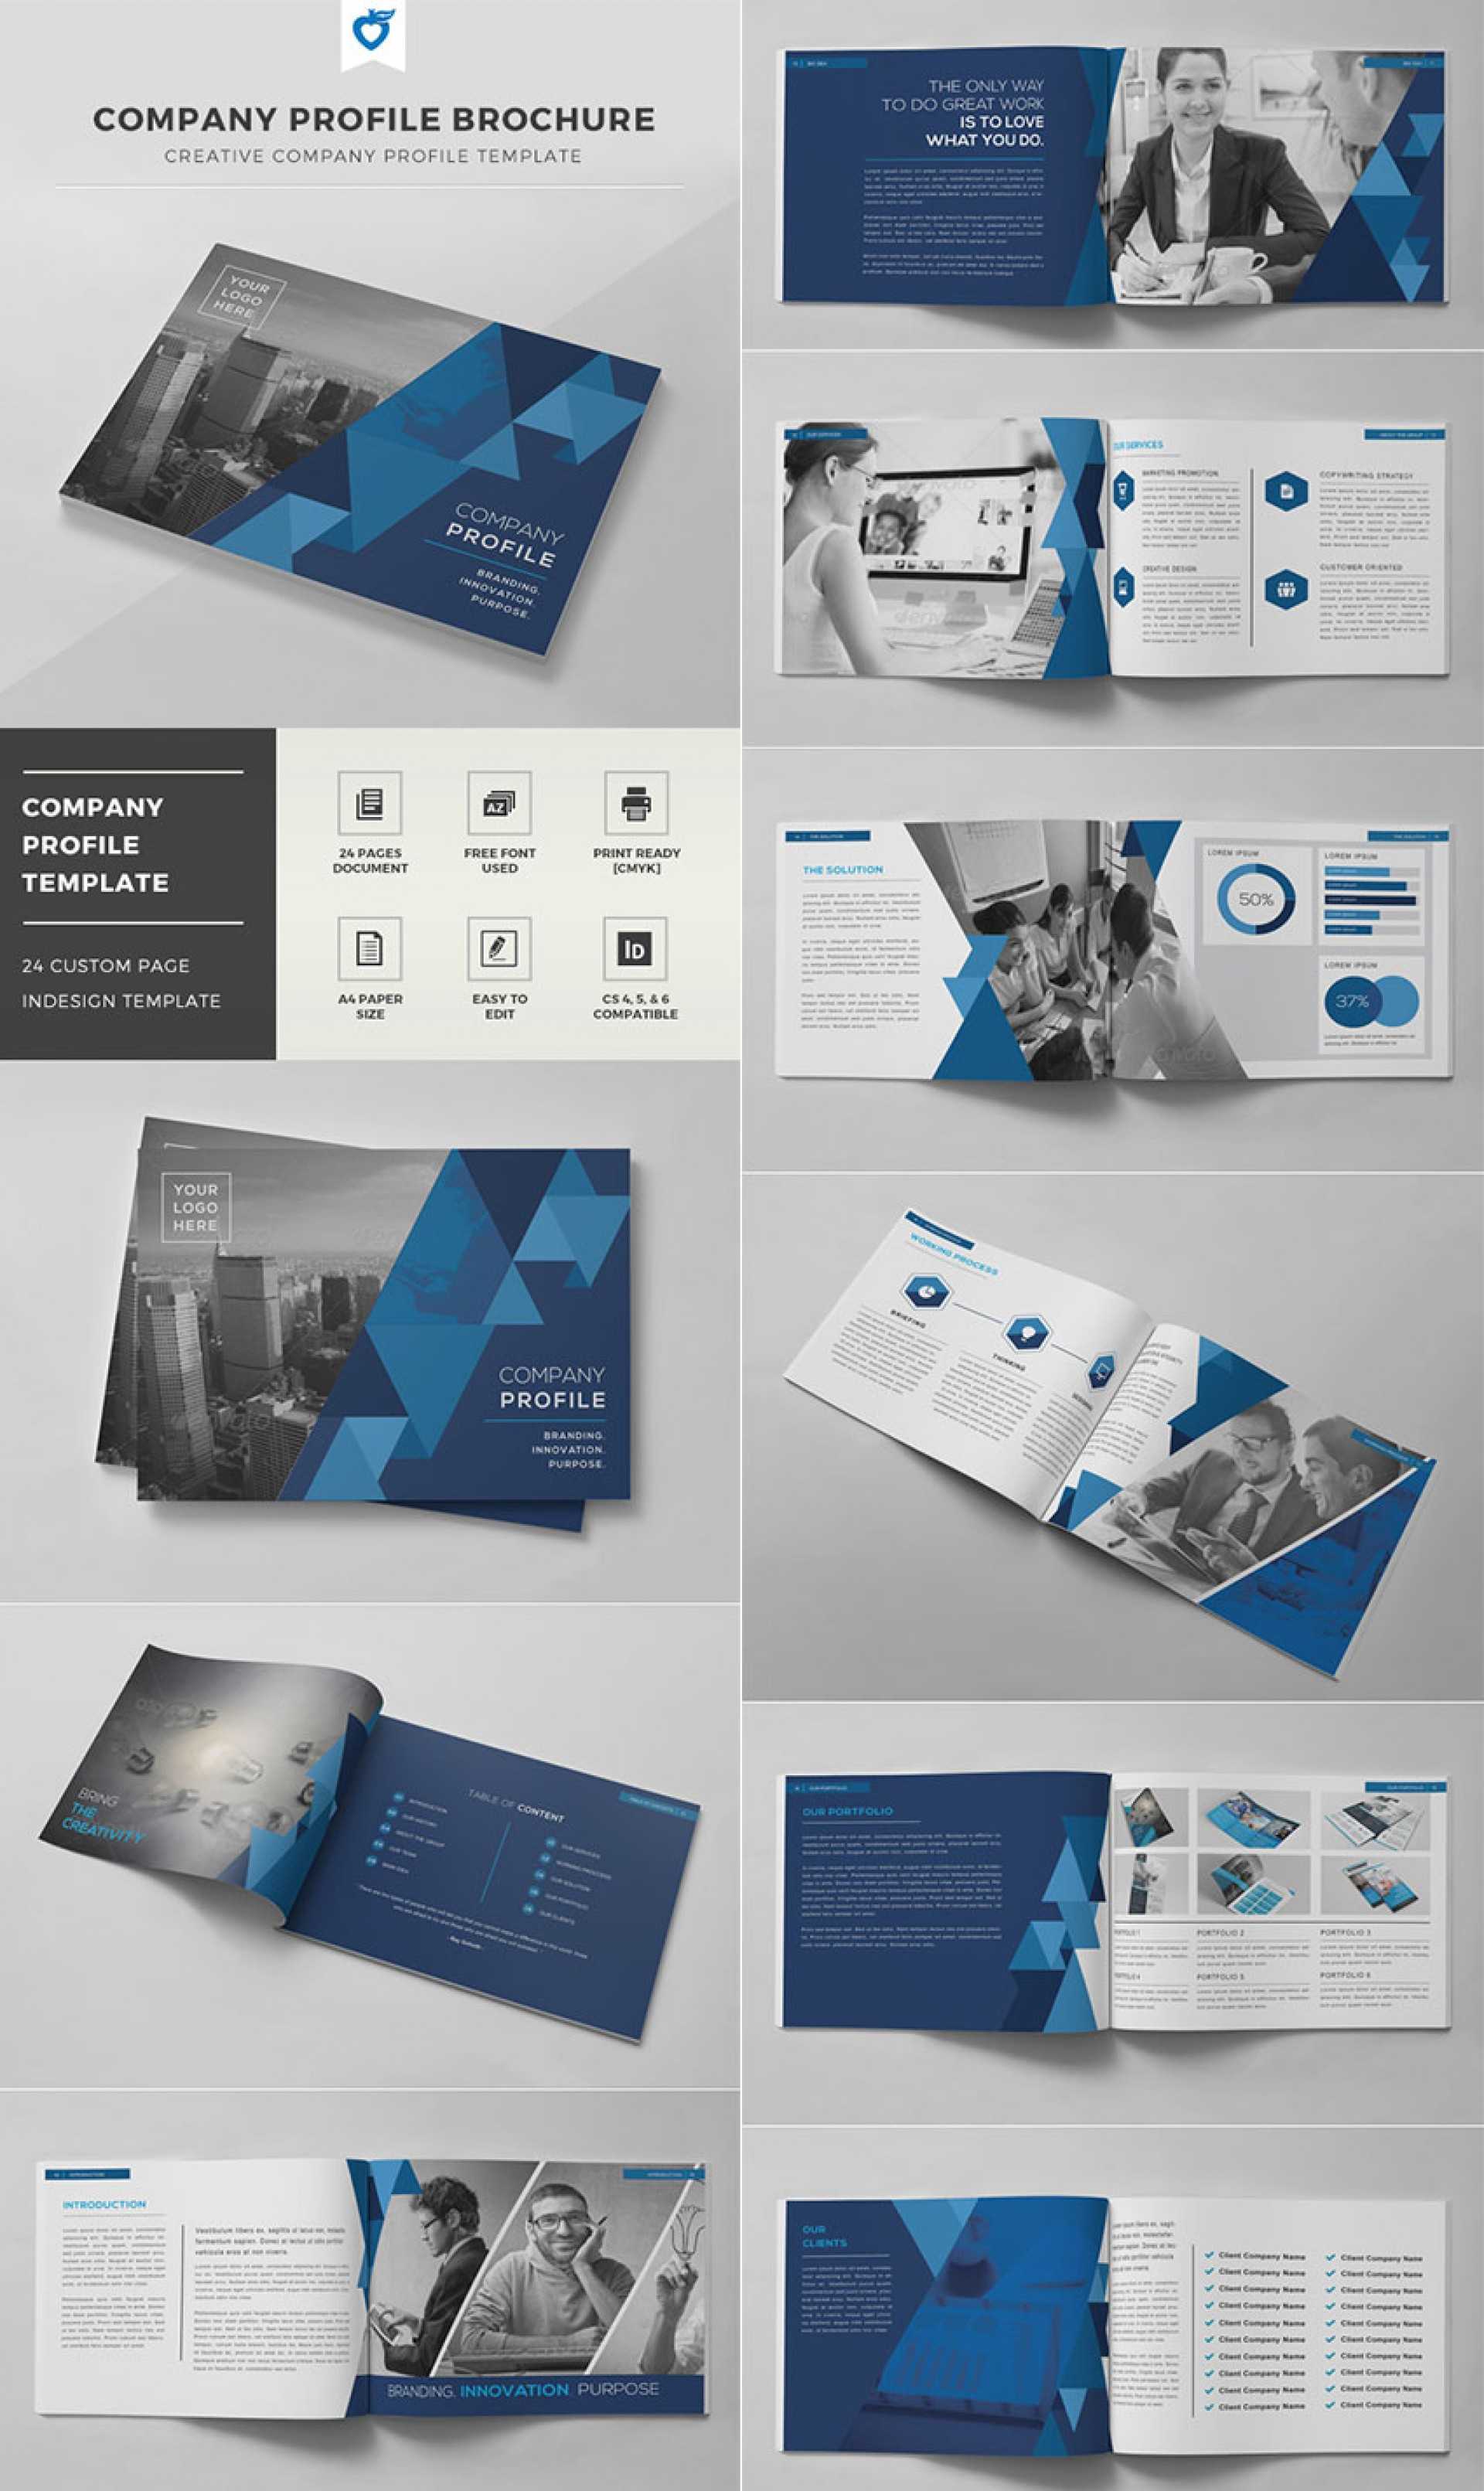 Indesign Template Free Brochure 004 Ideas Templates Company With Mac Brochure Templates